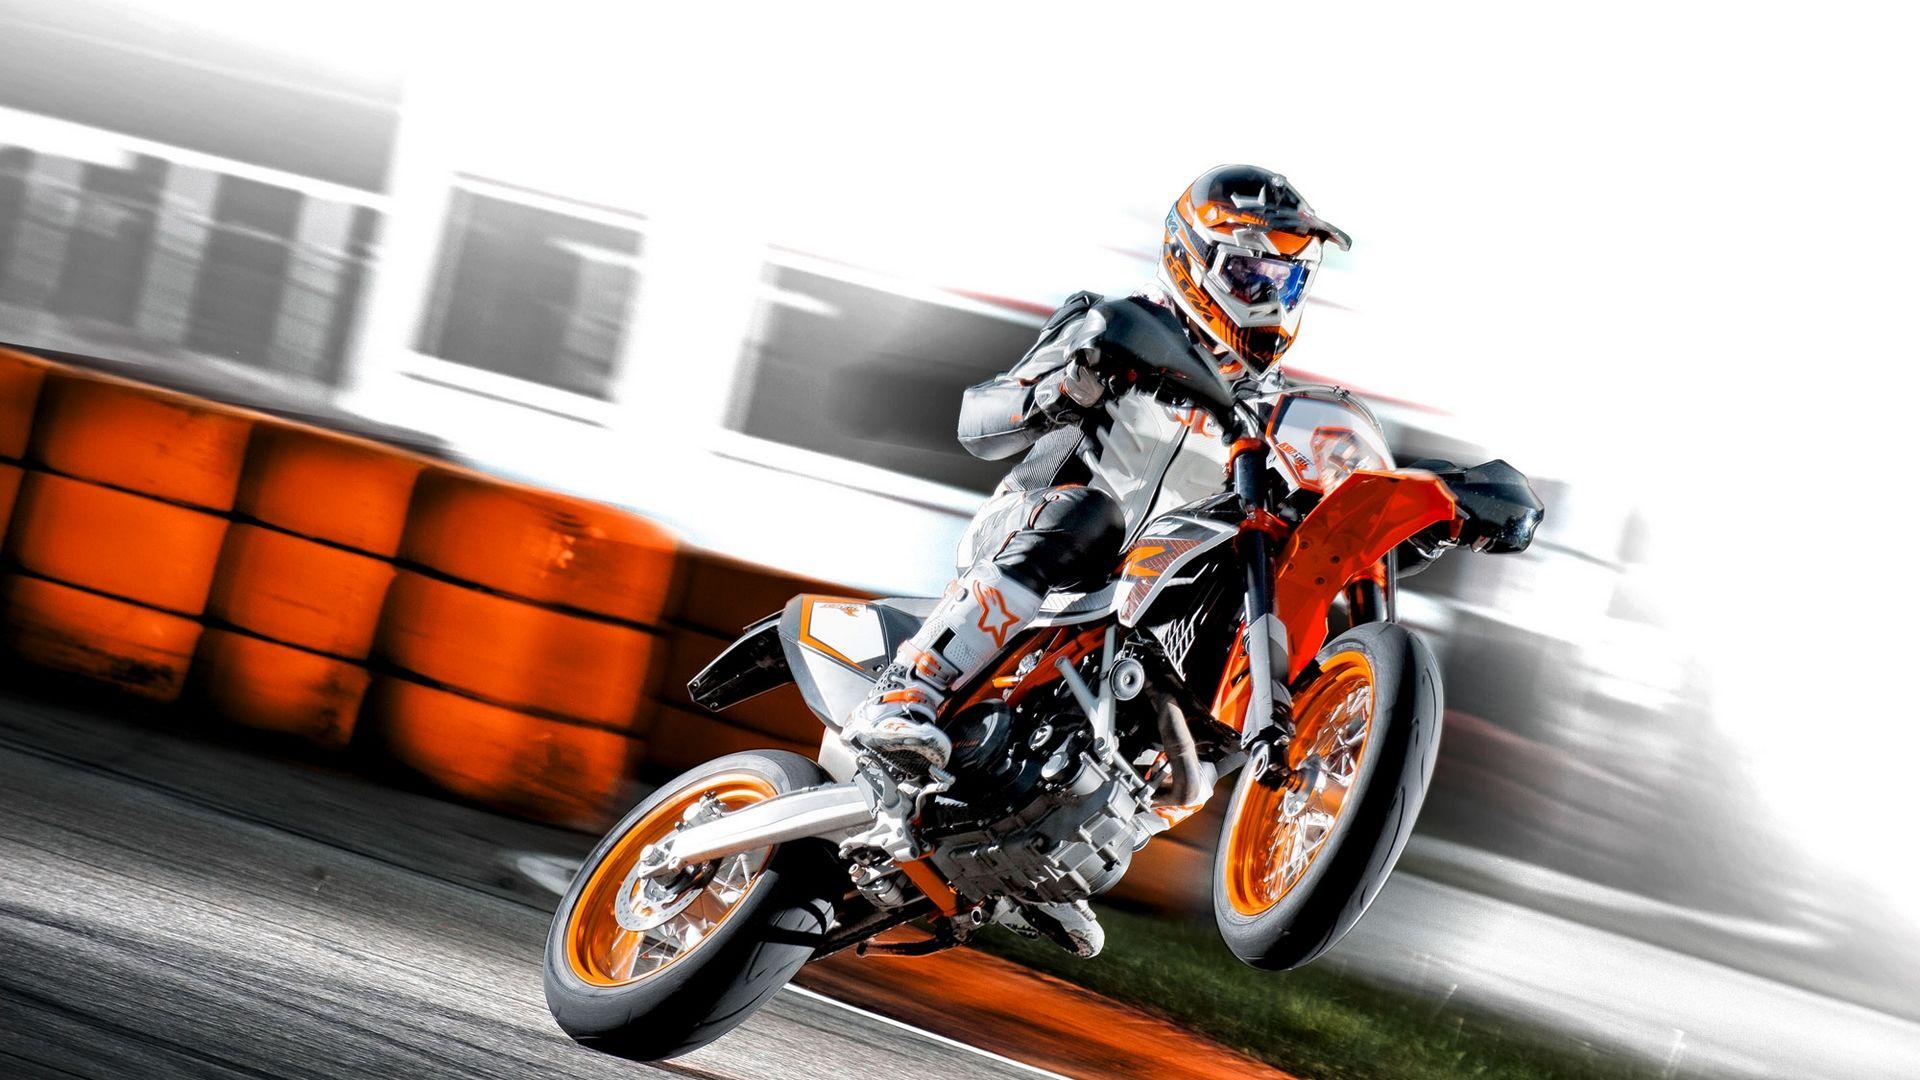 KTM Full HD Wallpaper and Background Imagex1080